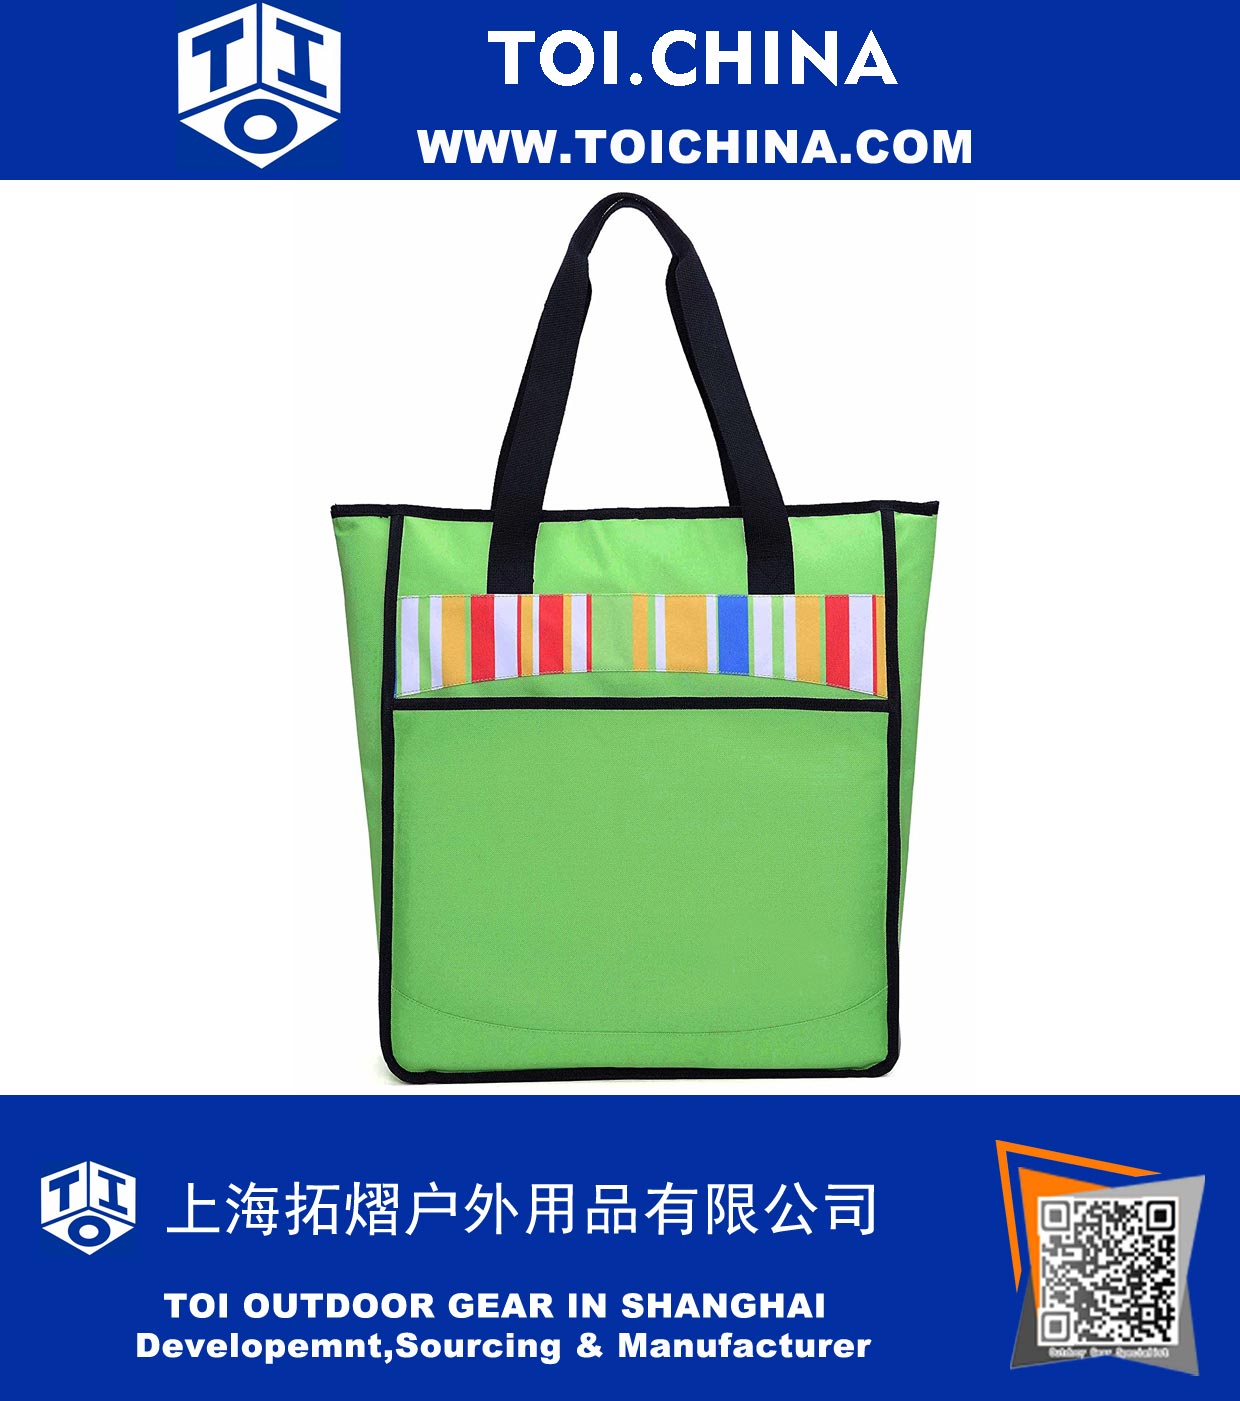 Insulated Grocery Bags Thermal Shopping Tote with Zipper